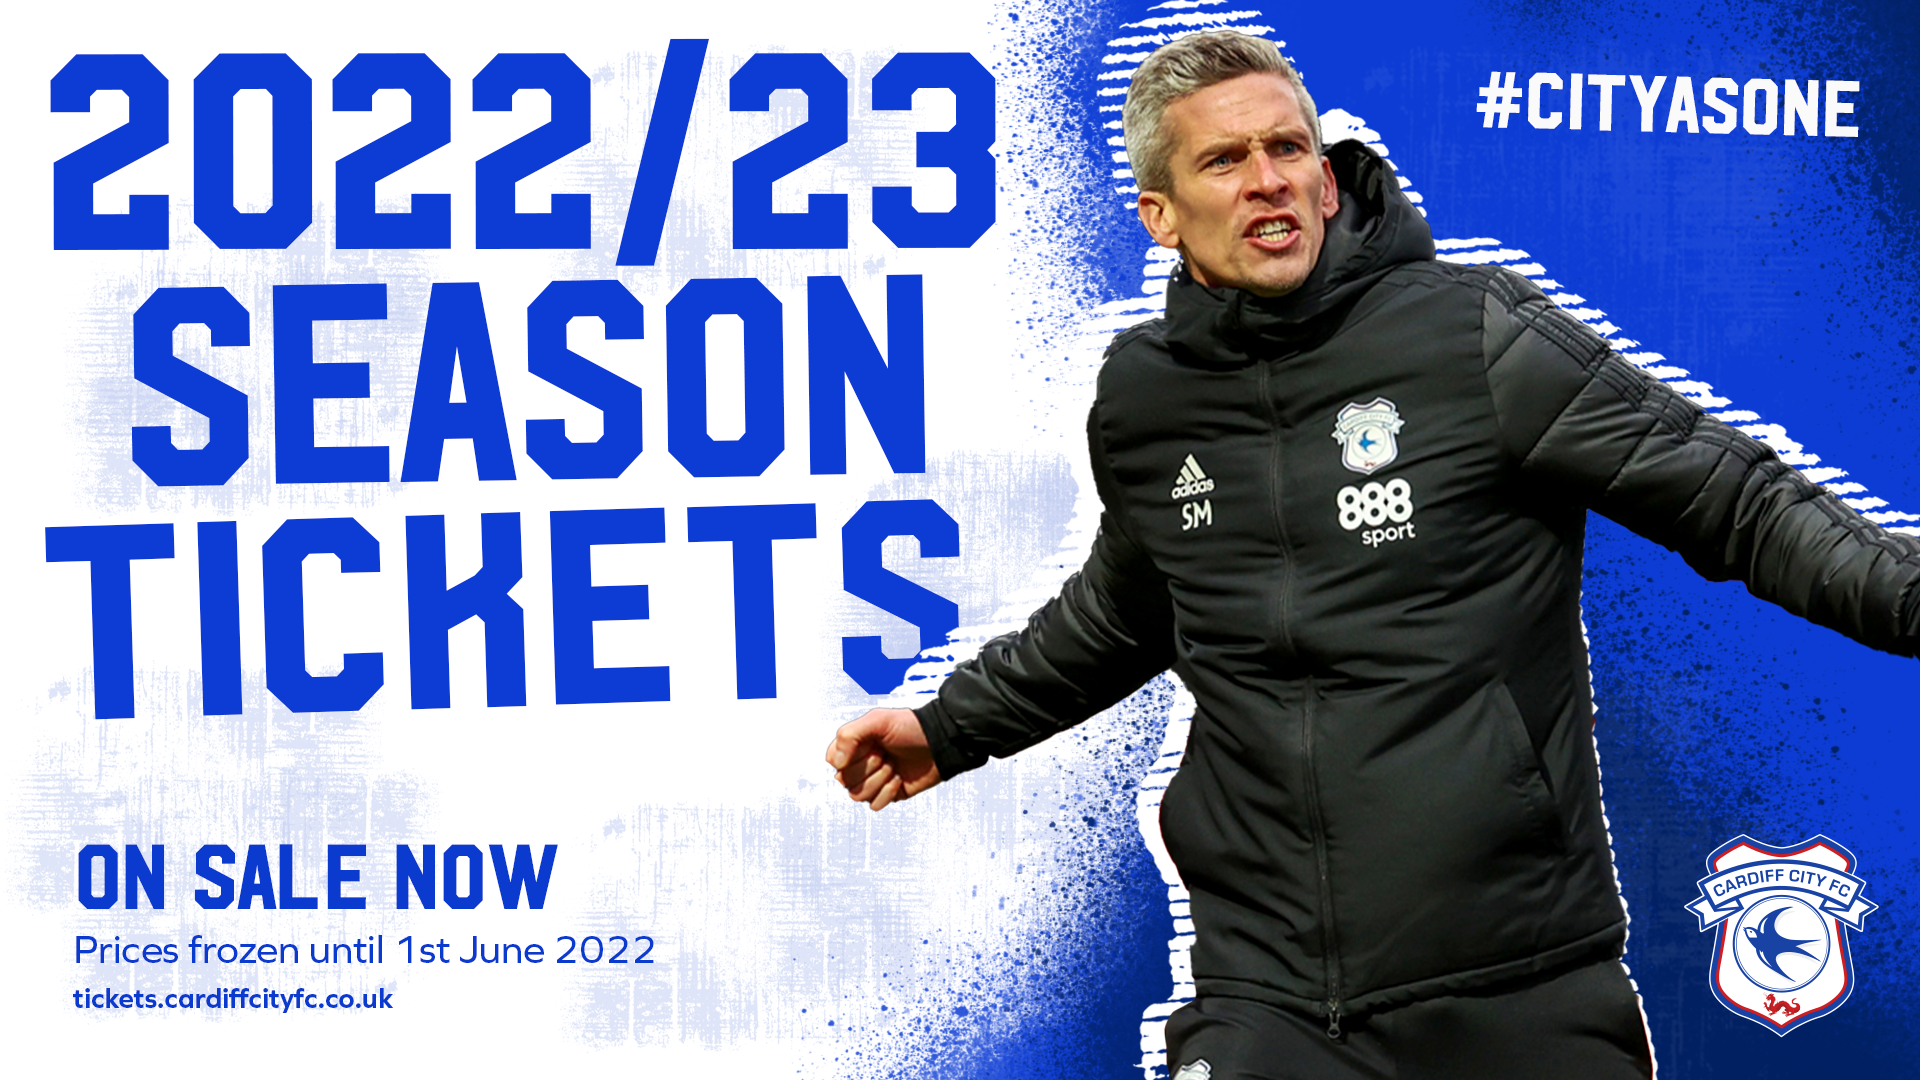 Season Tickets are on sale now...